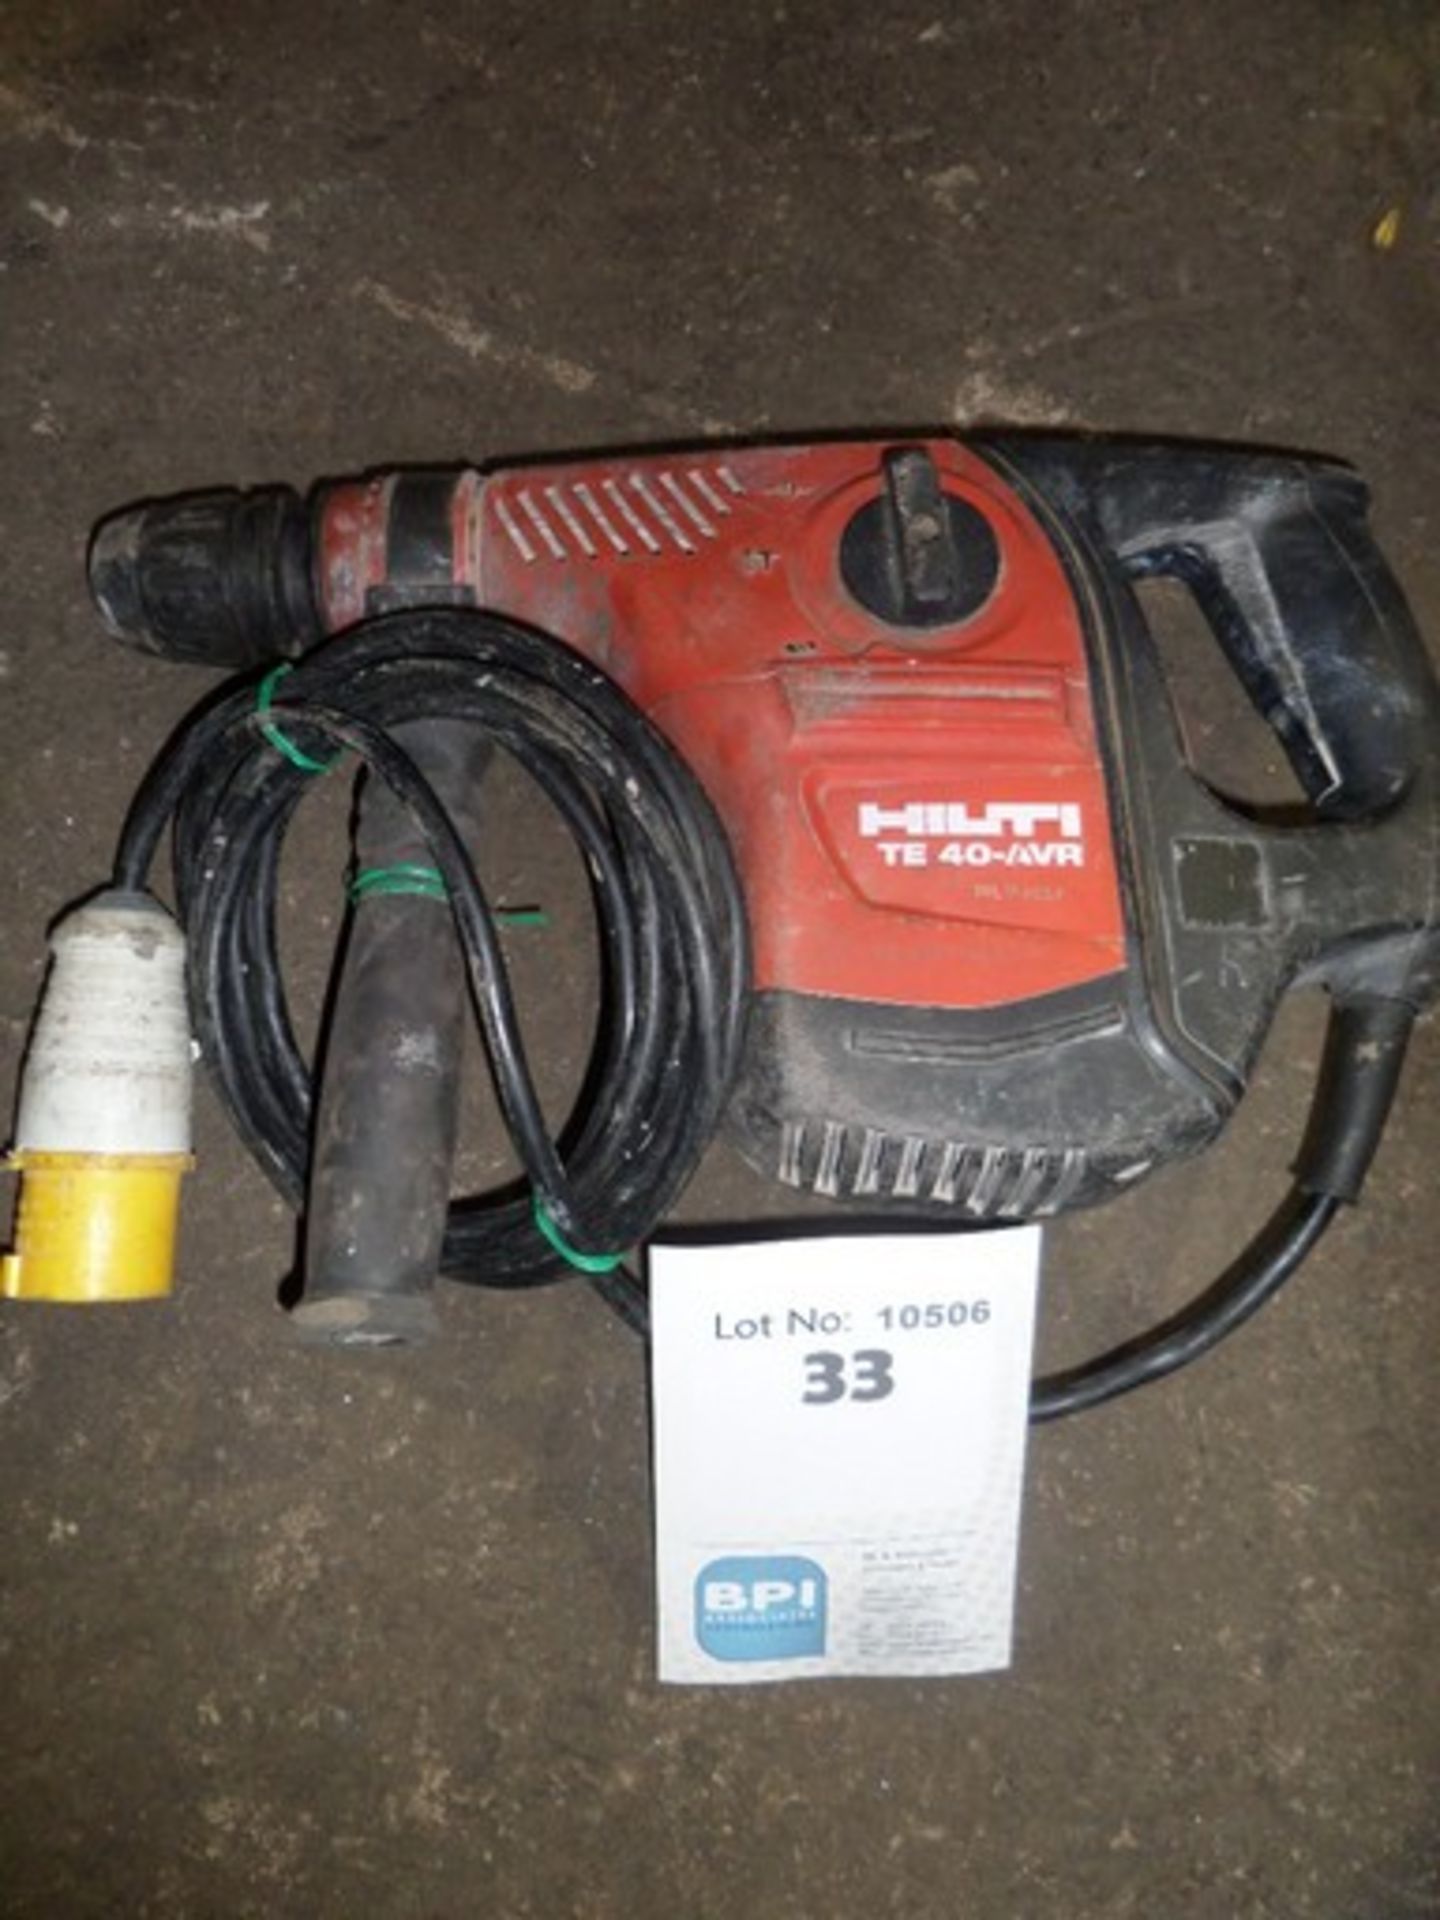 Hilti TE 40 AVR {015201} HILTI TE40 HAMMER DRILLER 110v 16amp connection and appears to be working